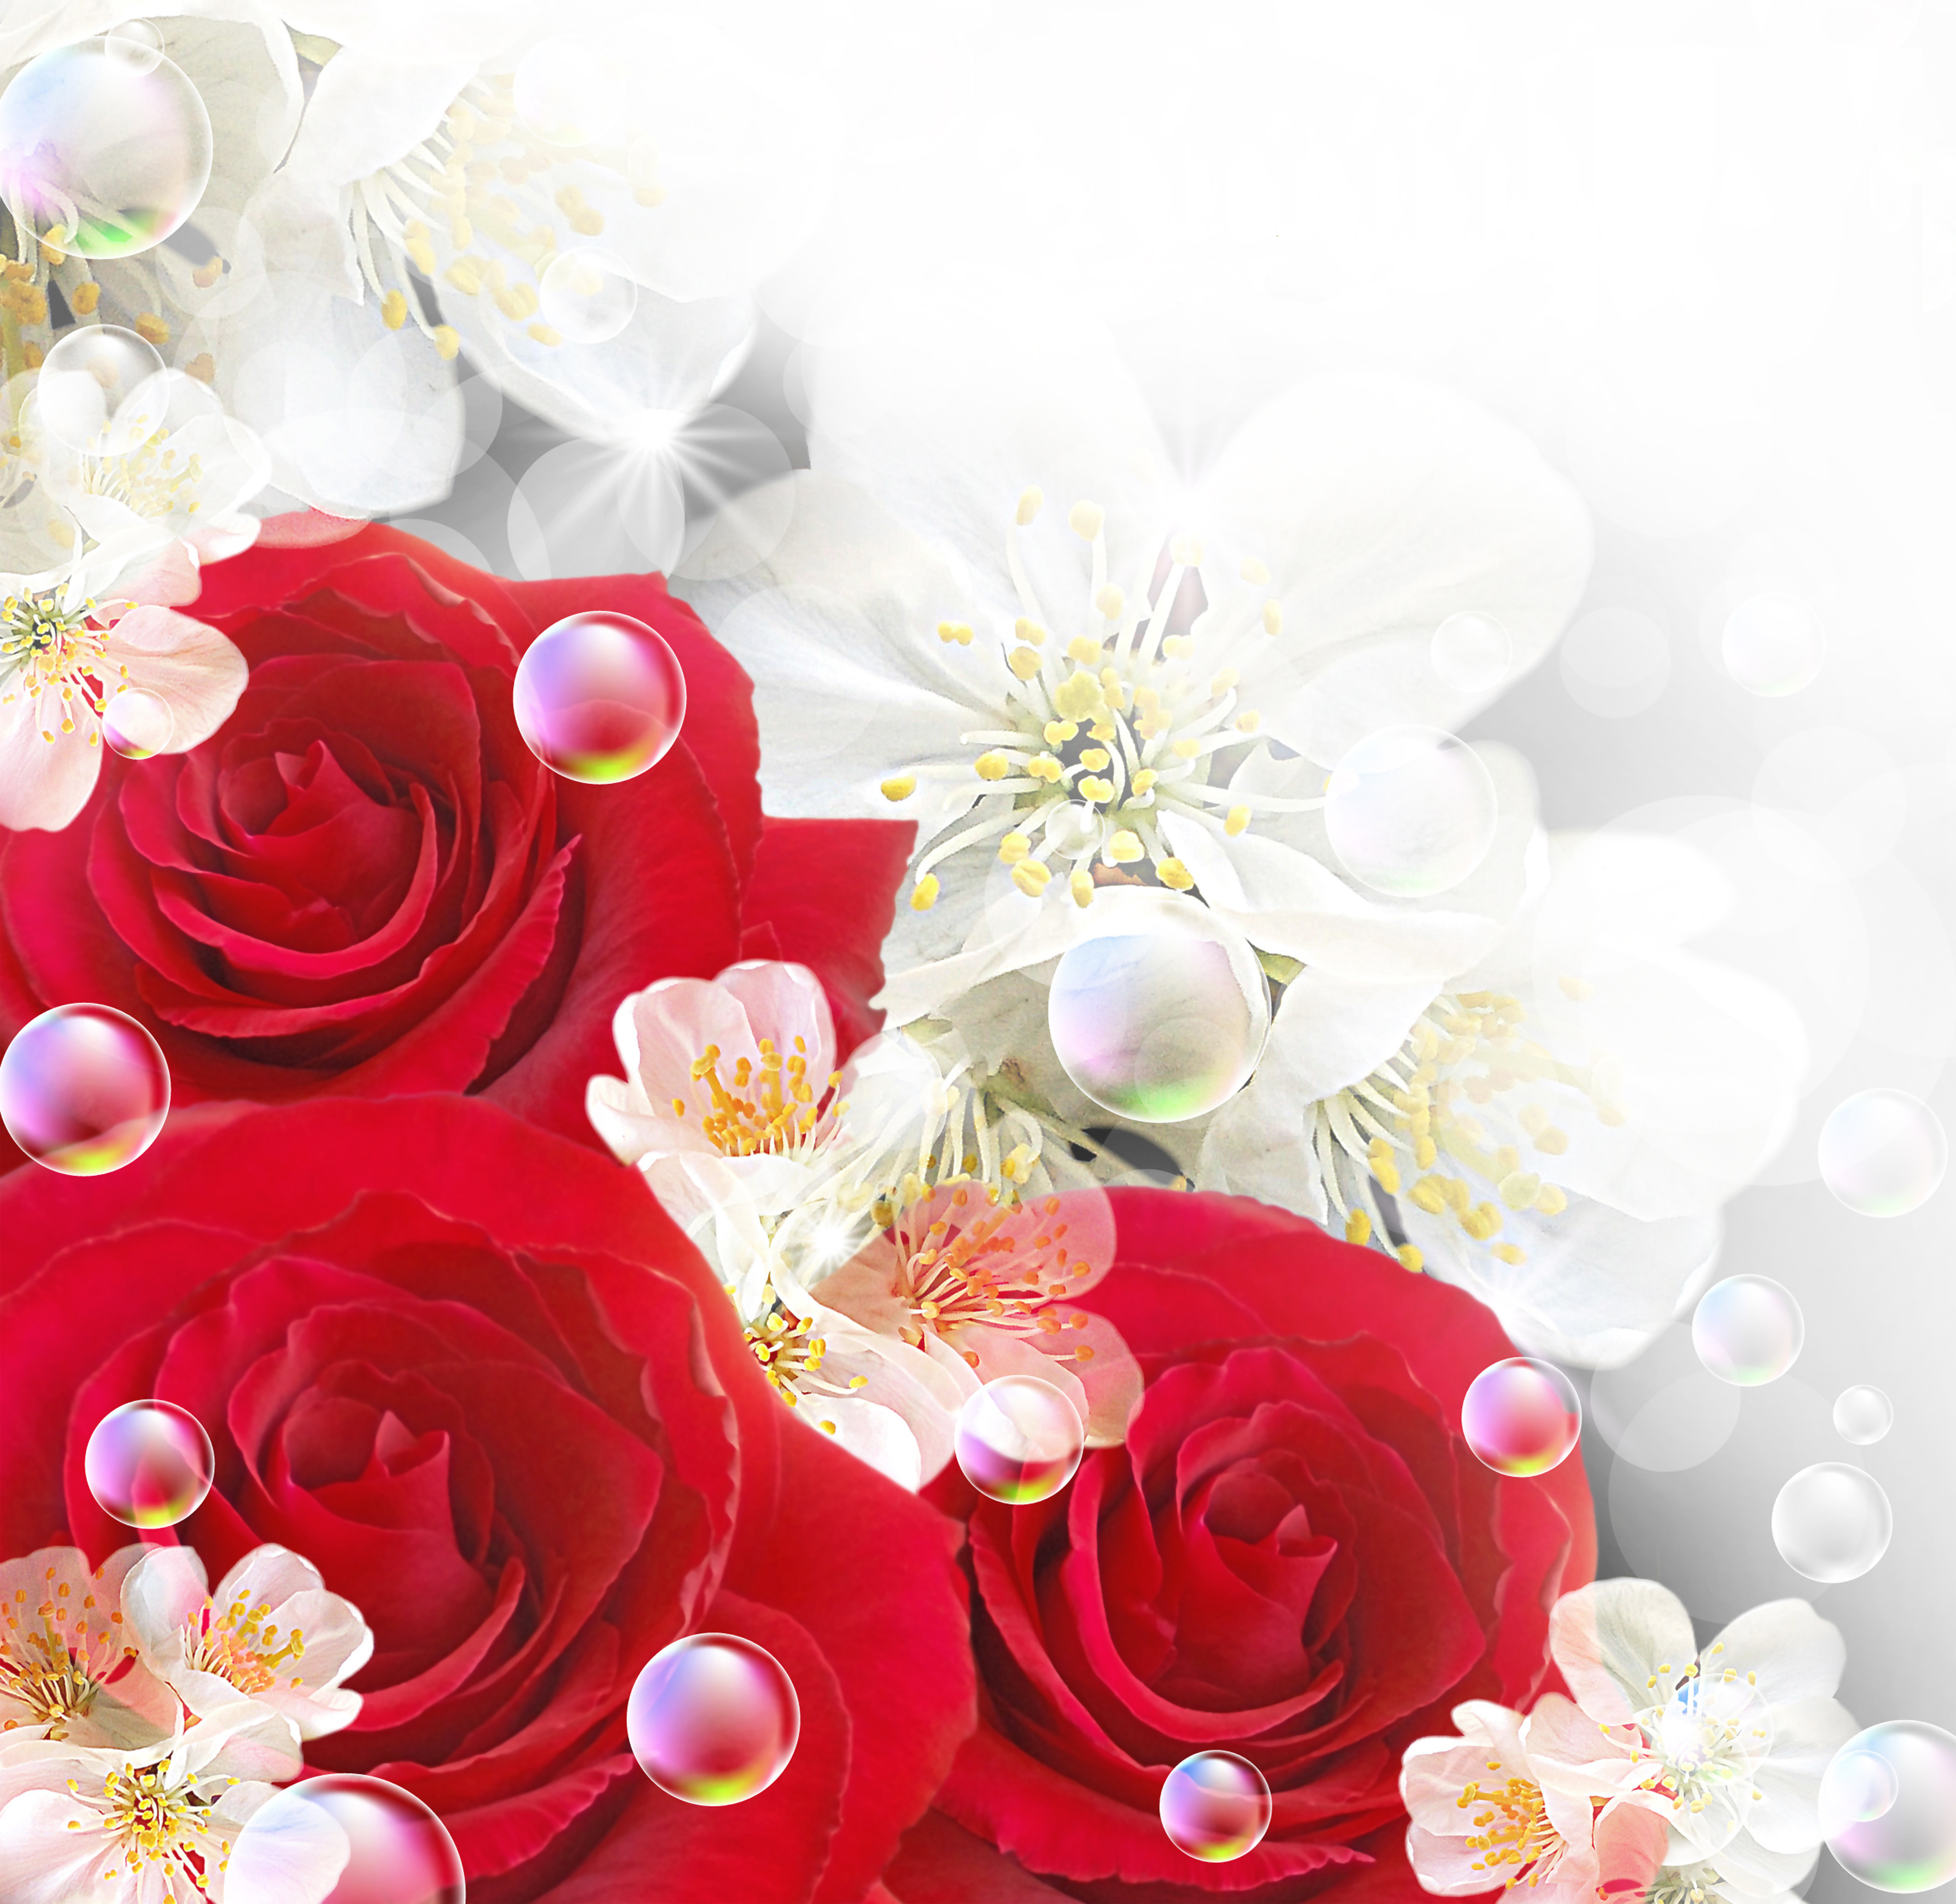 Background_with_Red_Roses_and_White_Flowers.jpg?m=1399676400.